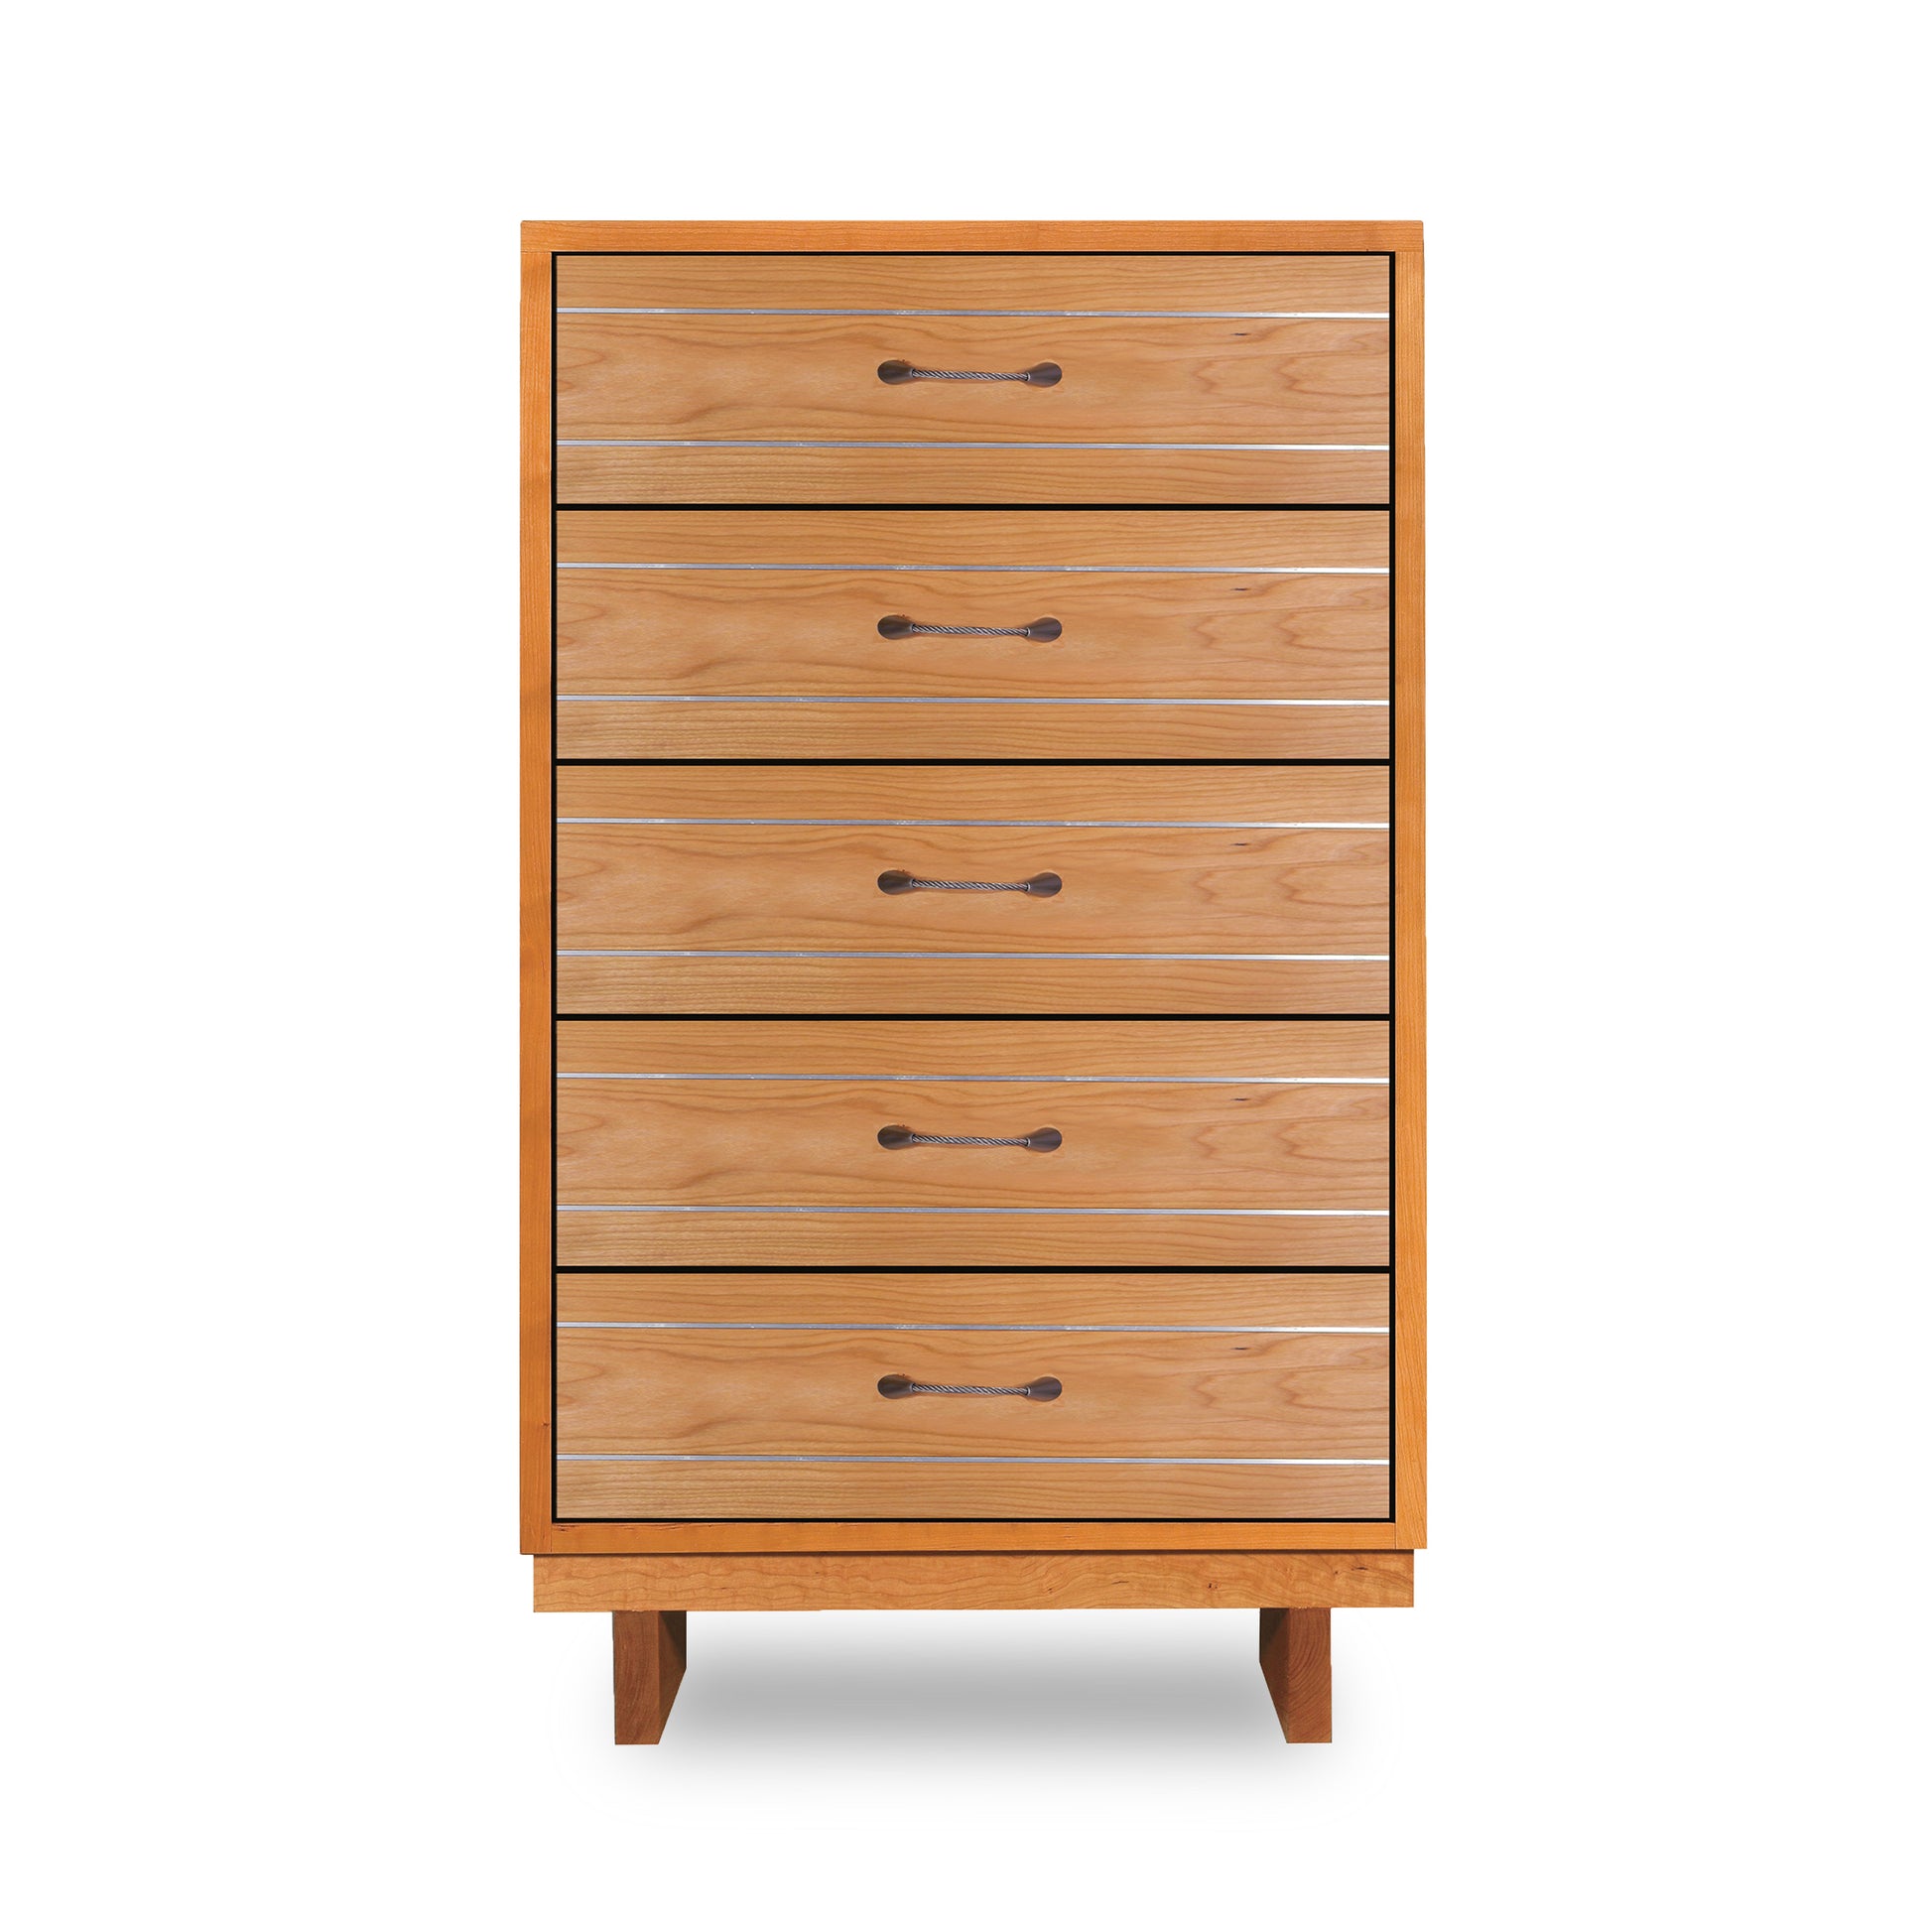 A Contemporary Cable 5-Drawer Chest by Vermont Furniture Designs on a white background.